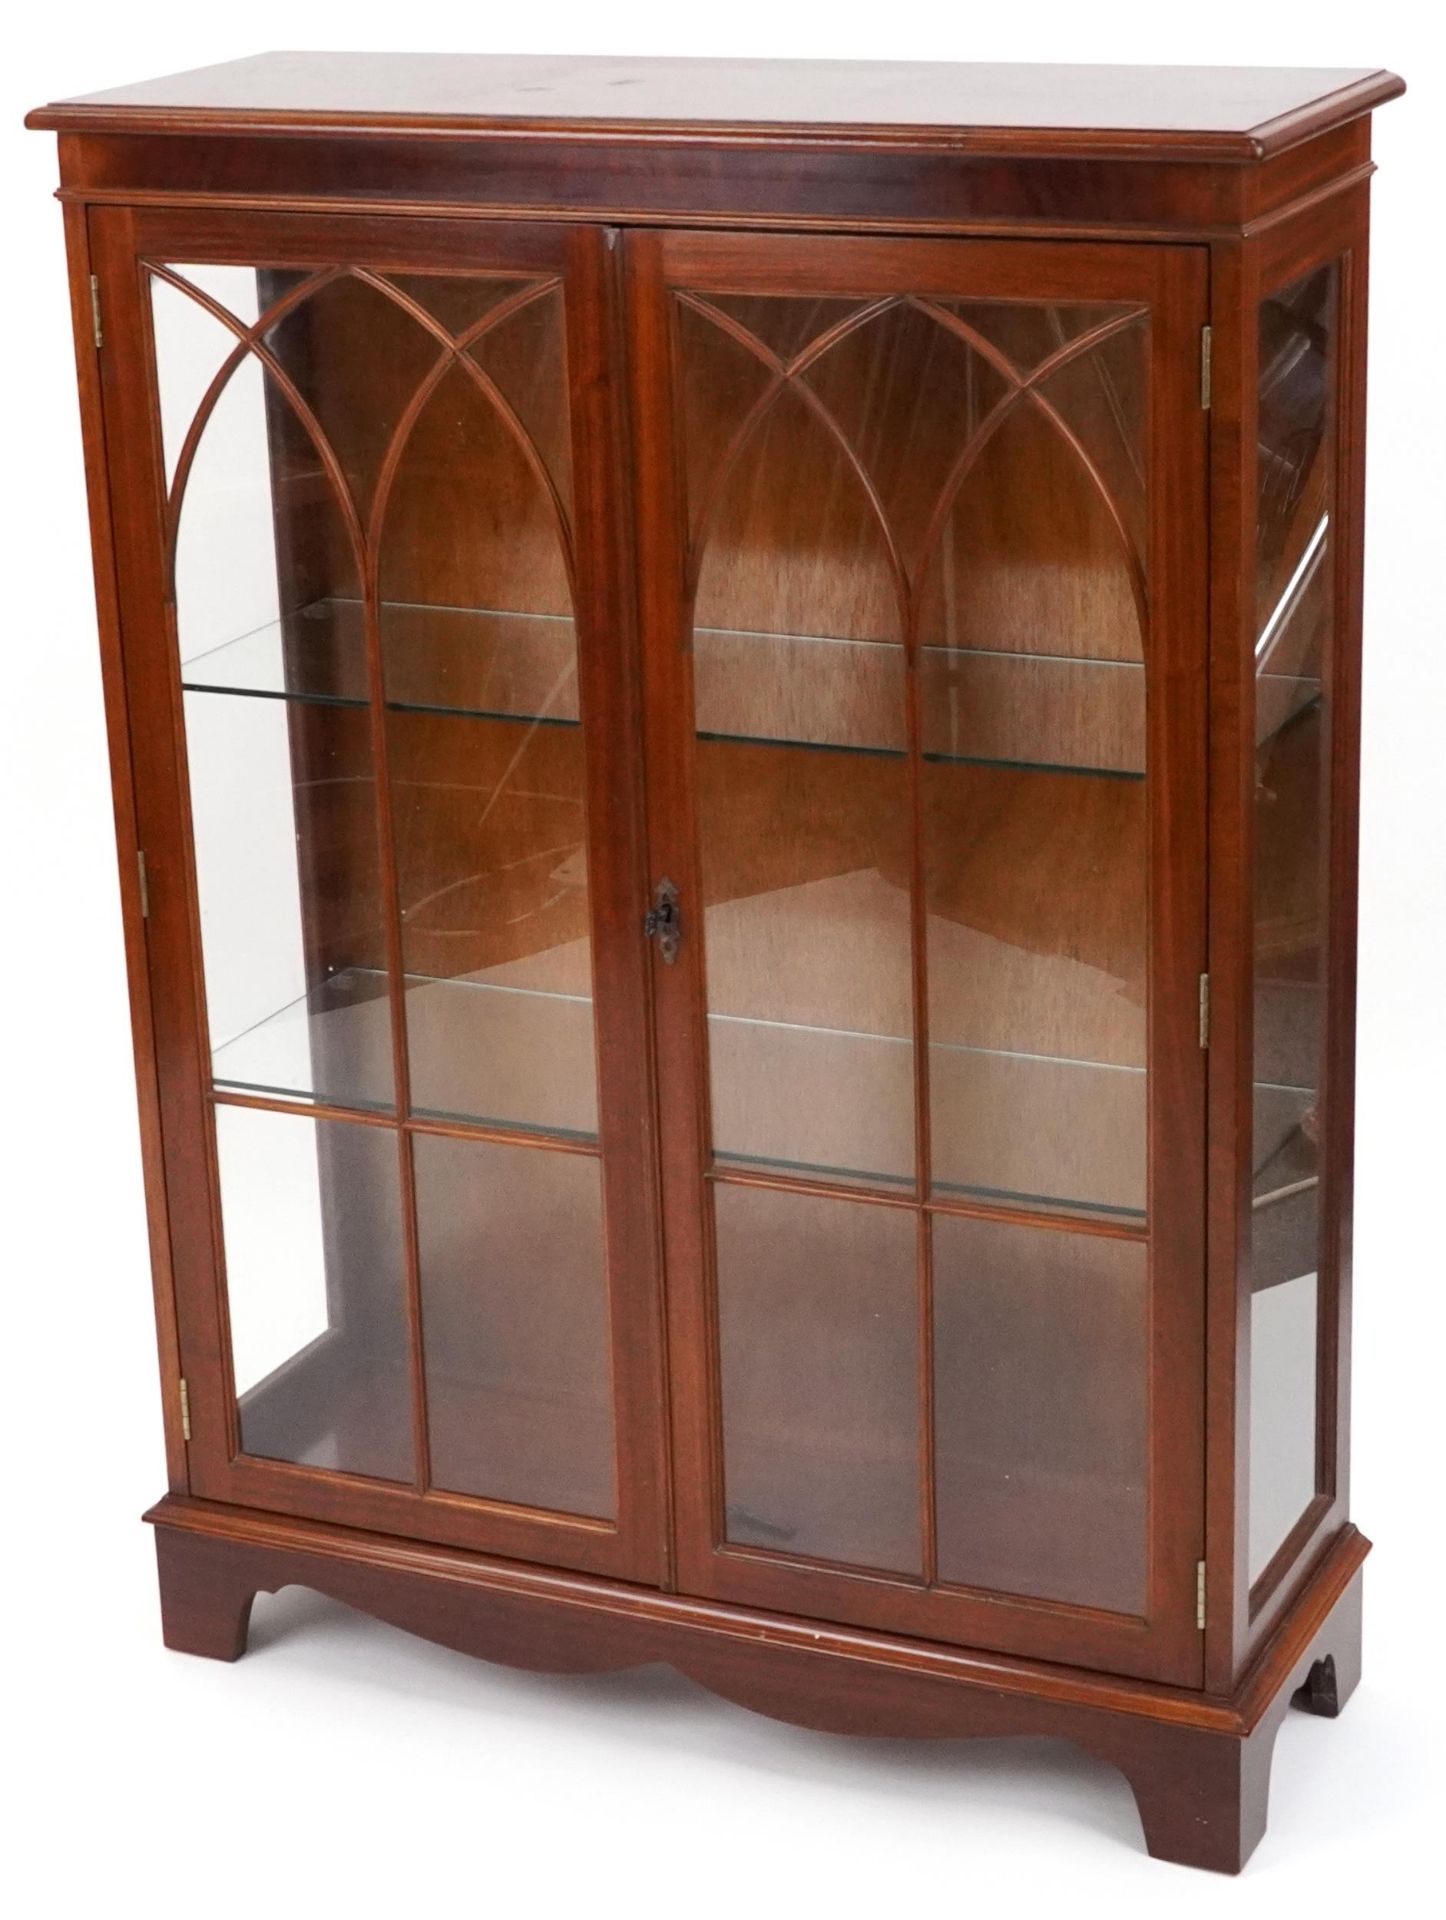 Mahogany two door display cabinet enclosing two glass shelves, 123.5cm H x 91cm W x 33cm D